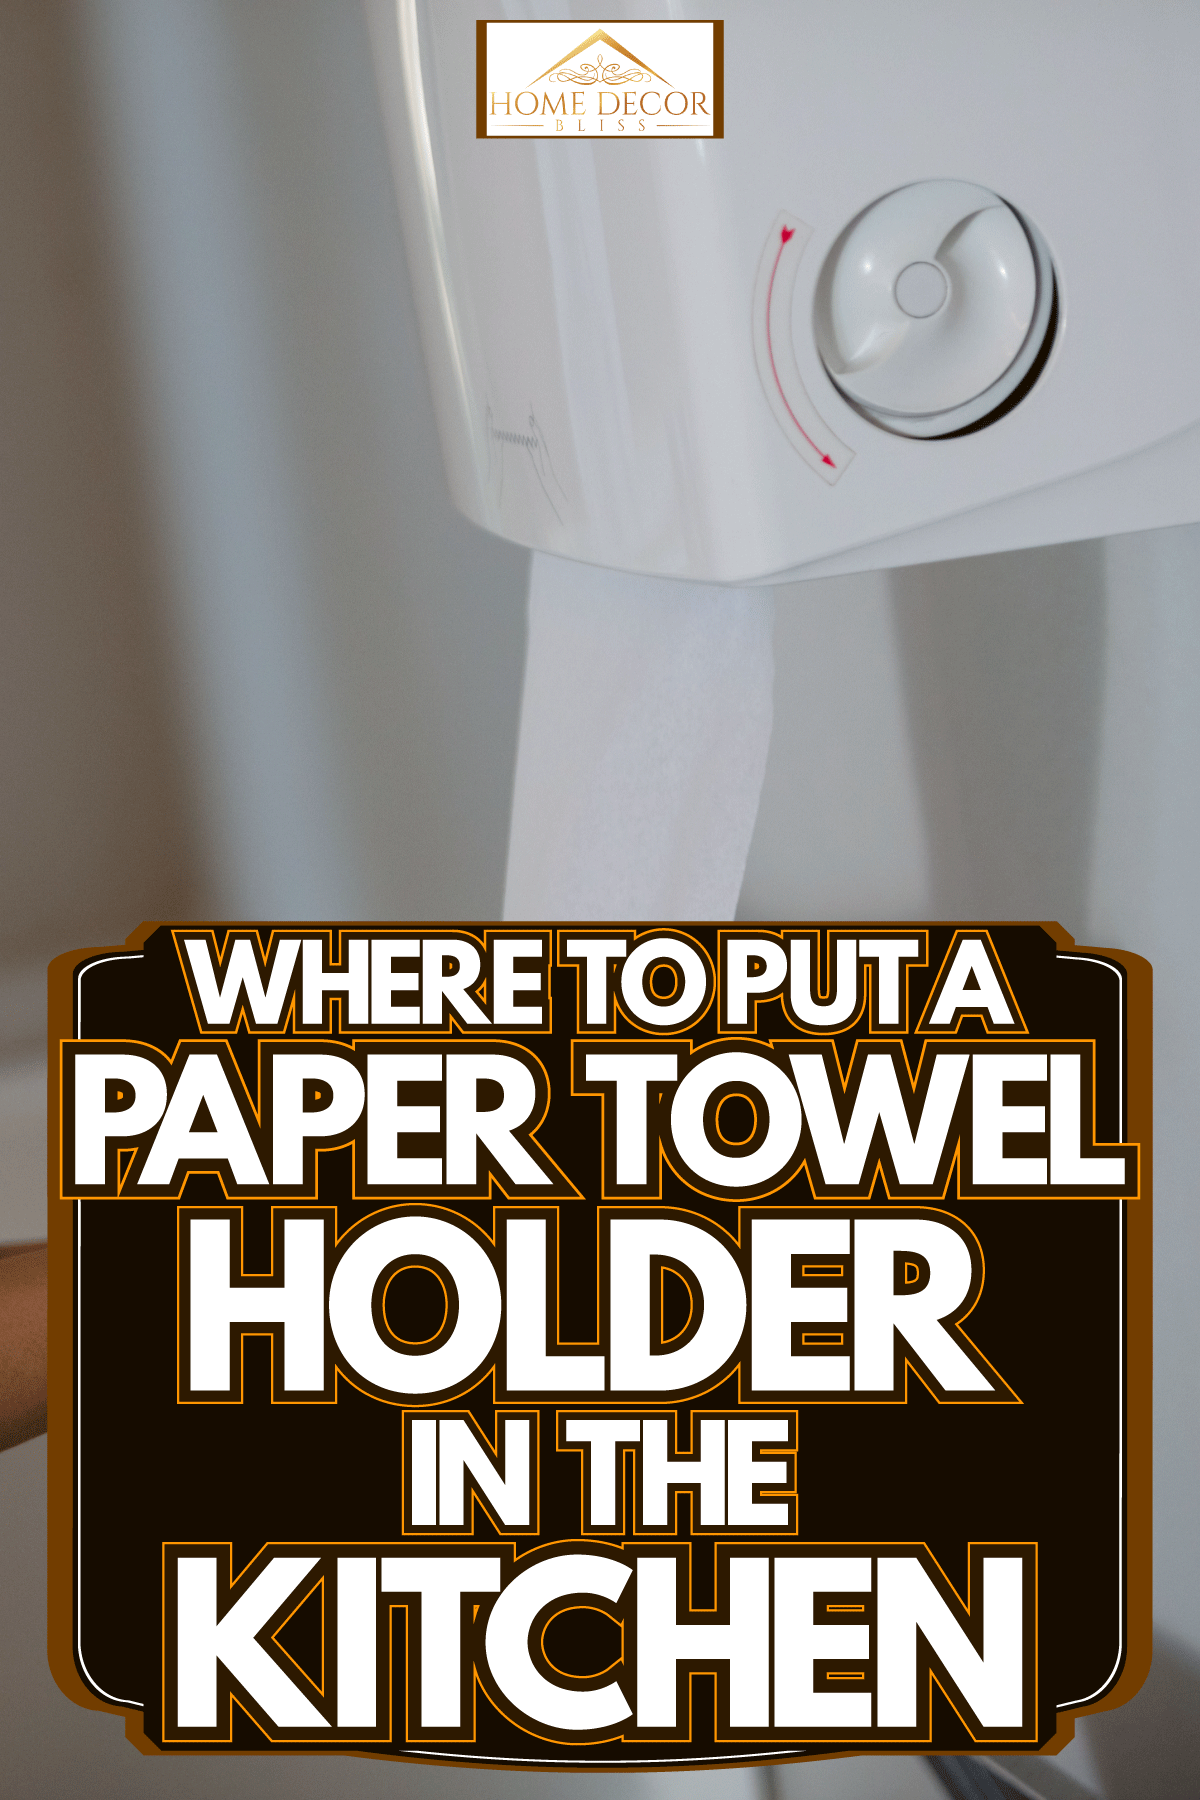 A woman getting a paper towel, Where To Put A Paper Towel Holder In The Kitchen